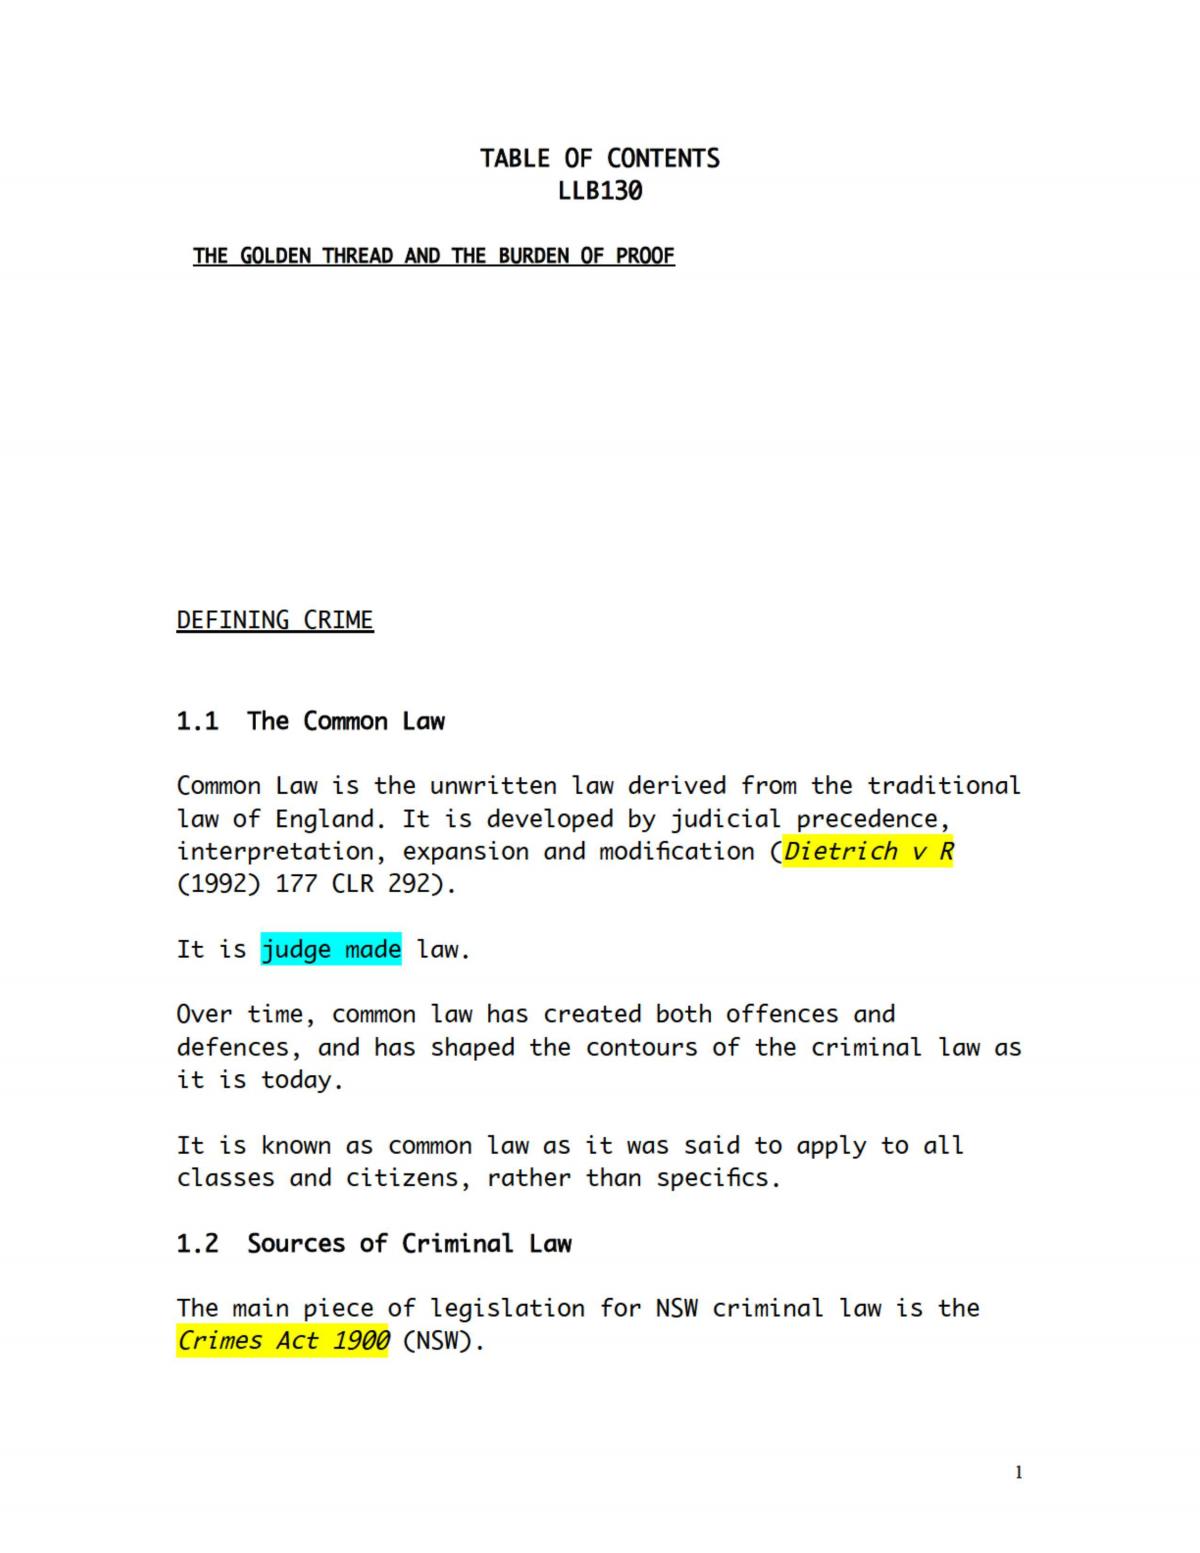 Study Notes for crim law a - Page 1